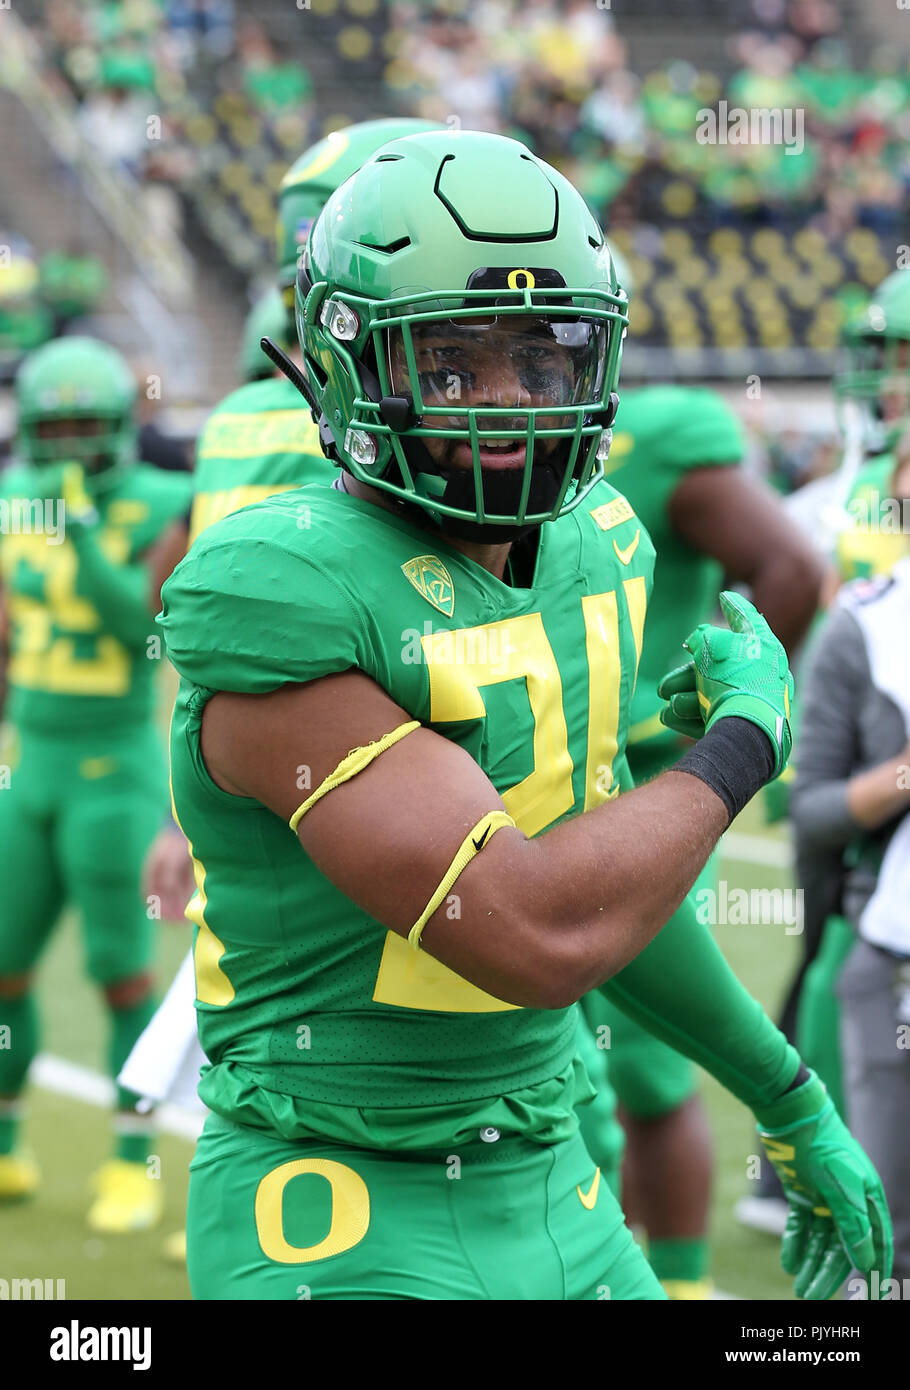 Oregon USA. 8th Sep, 2018. Oregon Ducks linebacker Keith Simms (24) during warmups before the NCAA football game between the Portland State Vikings and the Oregon Ducks at Autzen Stadium, Eugene, OR. Larry C. Lawson/CSM/Alamy Live News Stock Photo